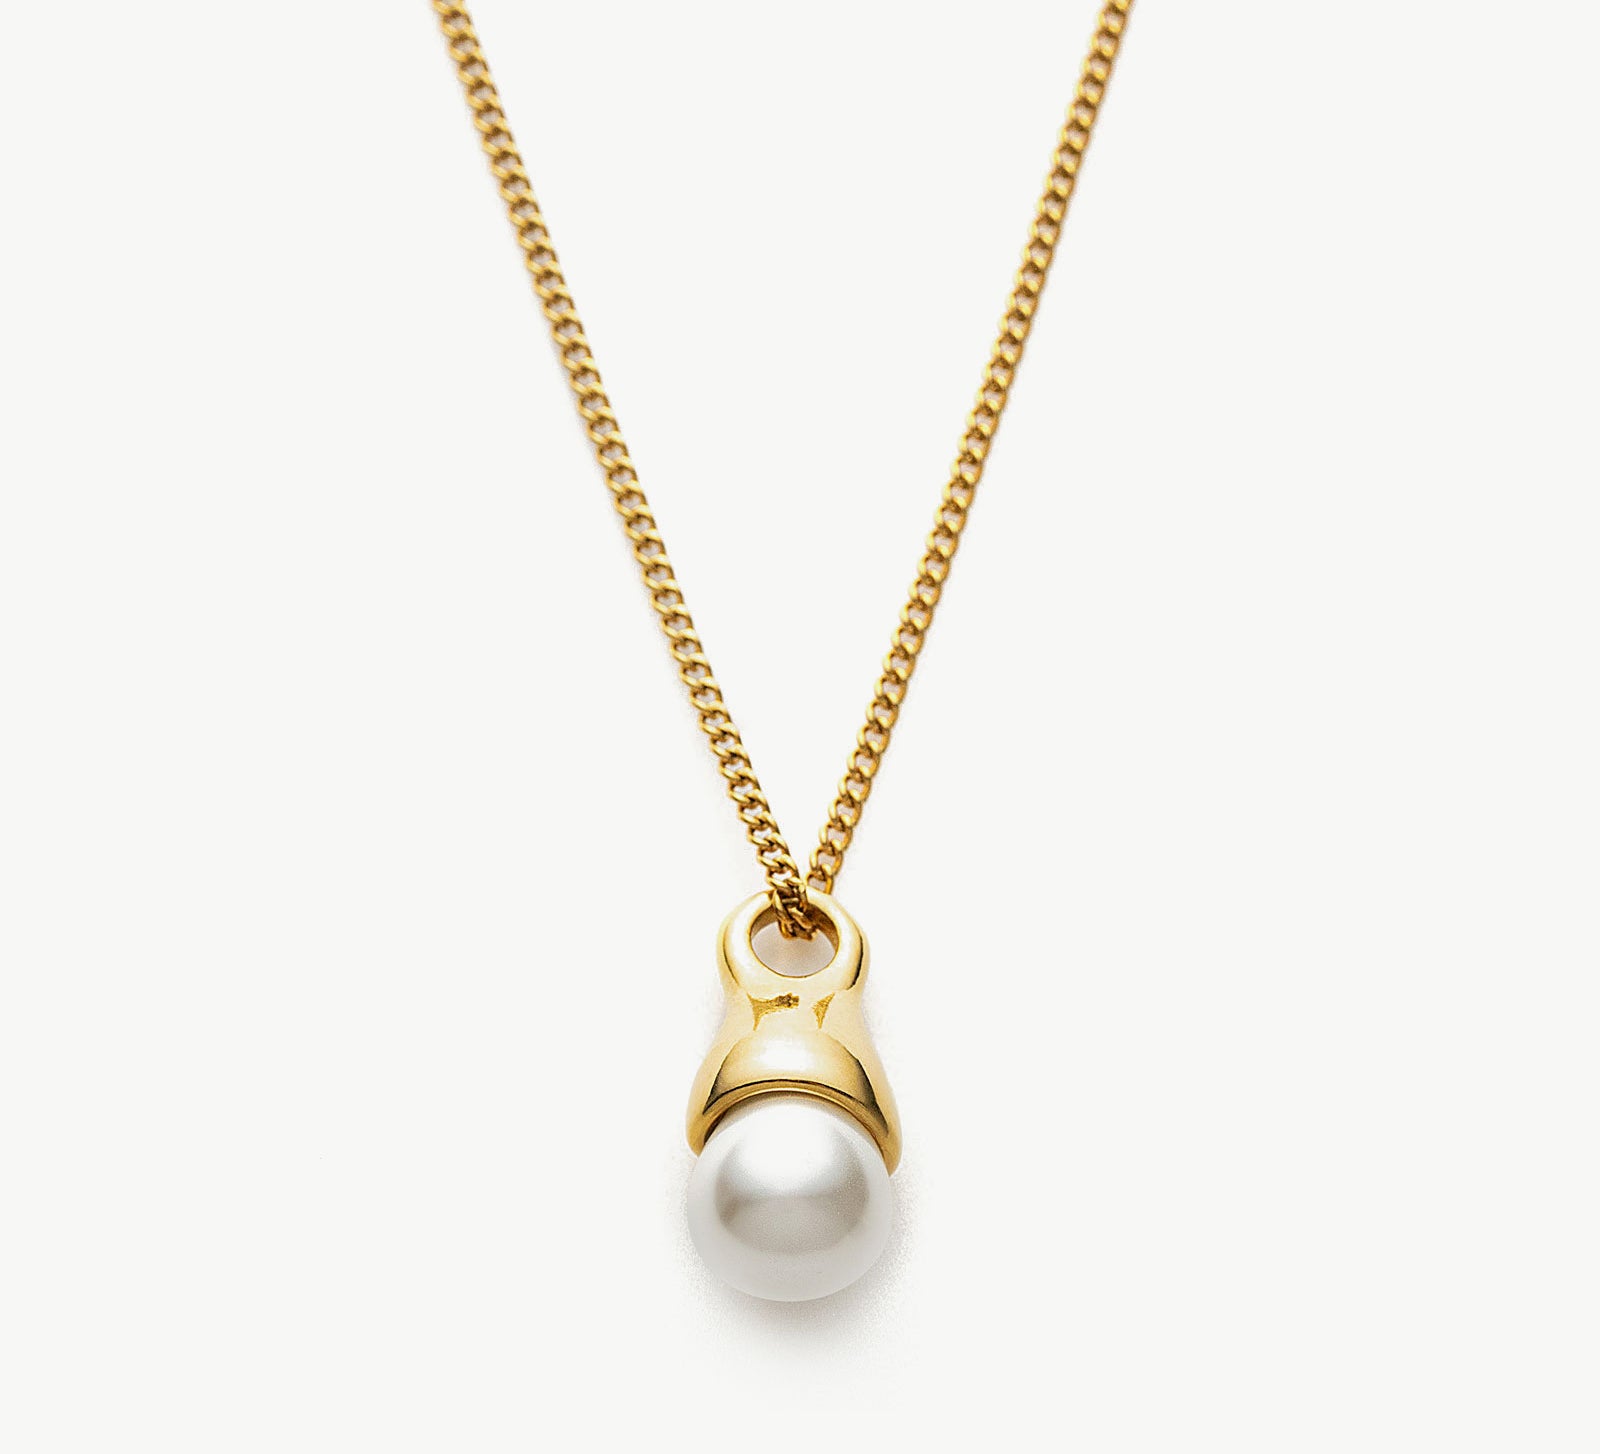 Pearl Drop Pendant Necklace in Gold, showcasing a timeless gold pendant with a lustrous pearl, adding a touch of elegance and sophistication to your neckline